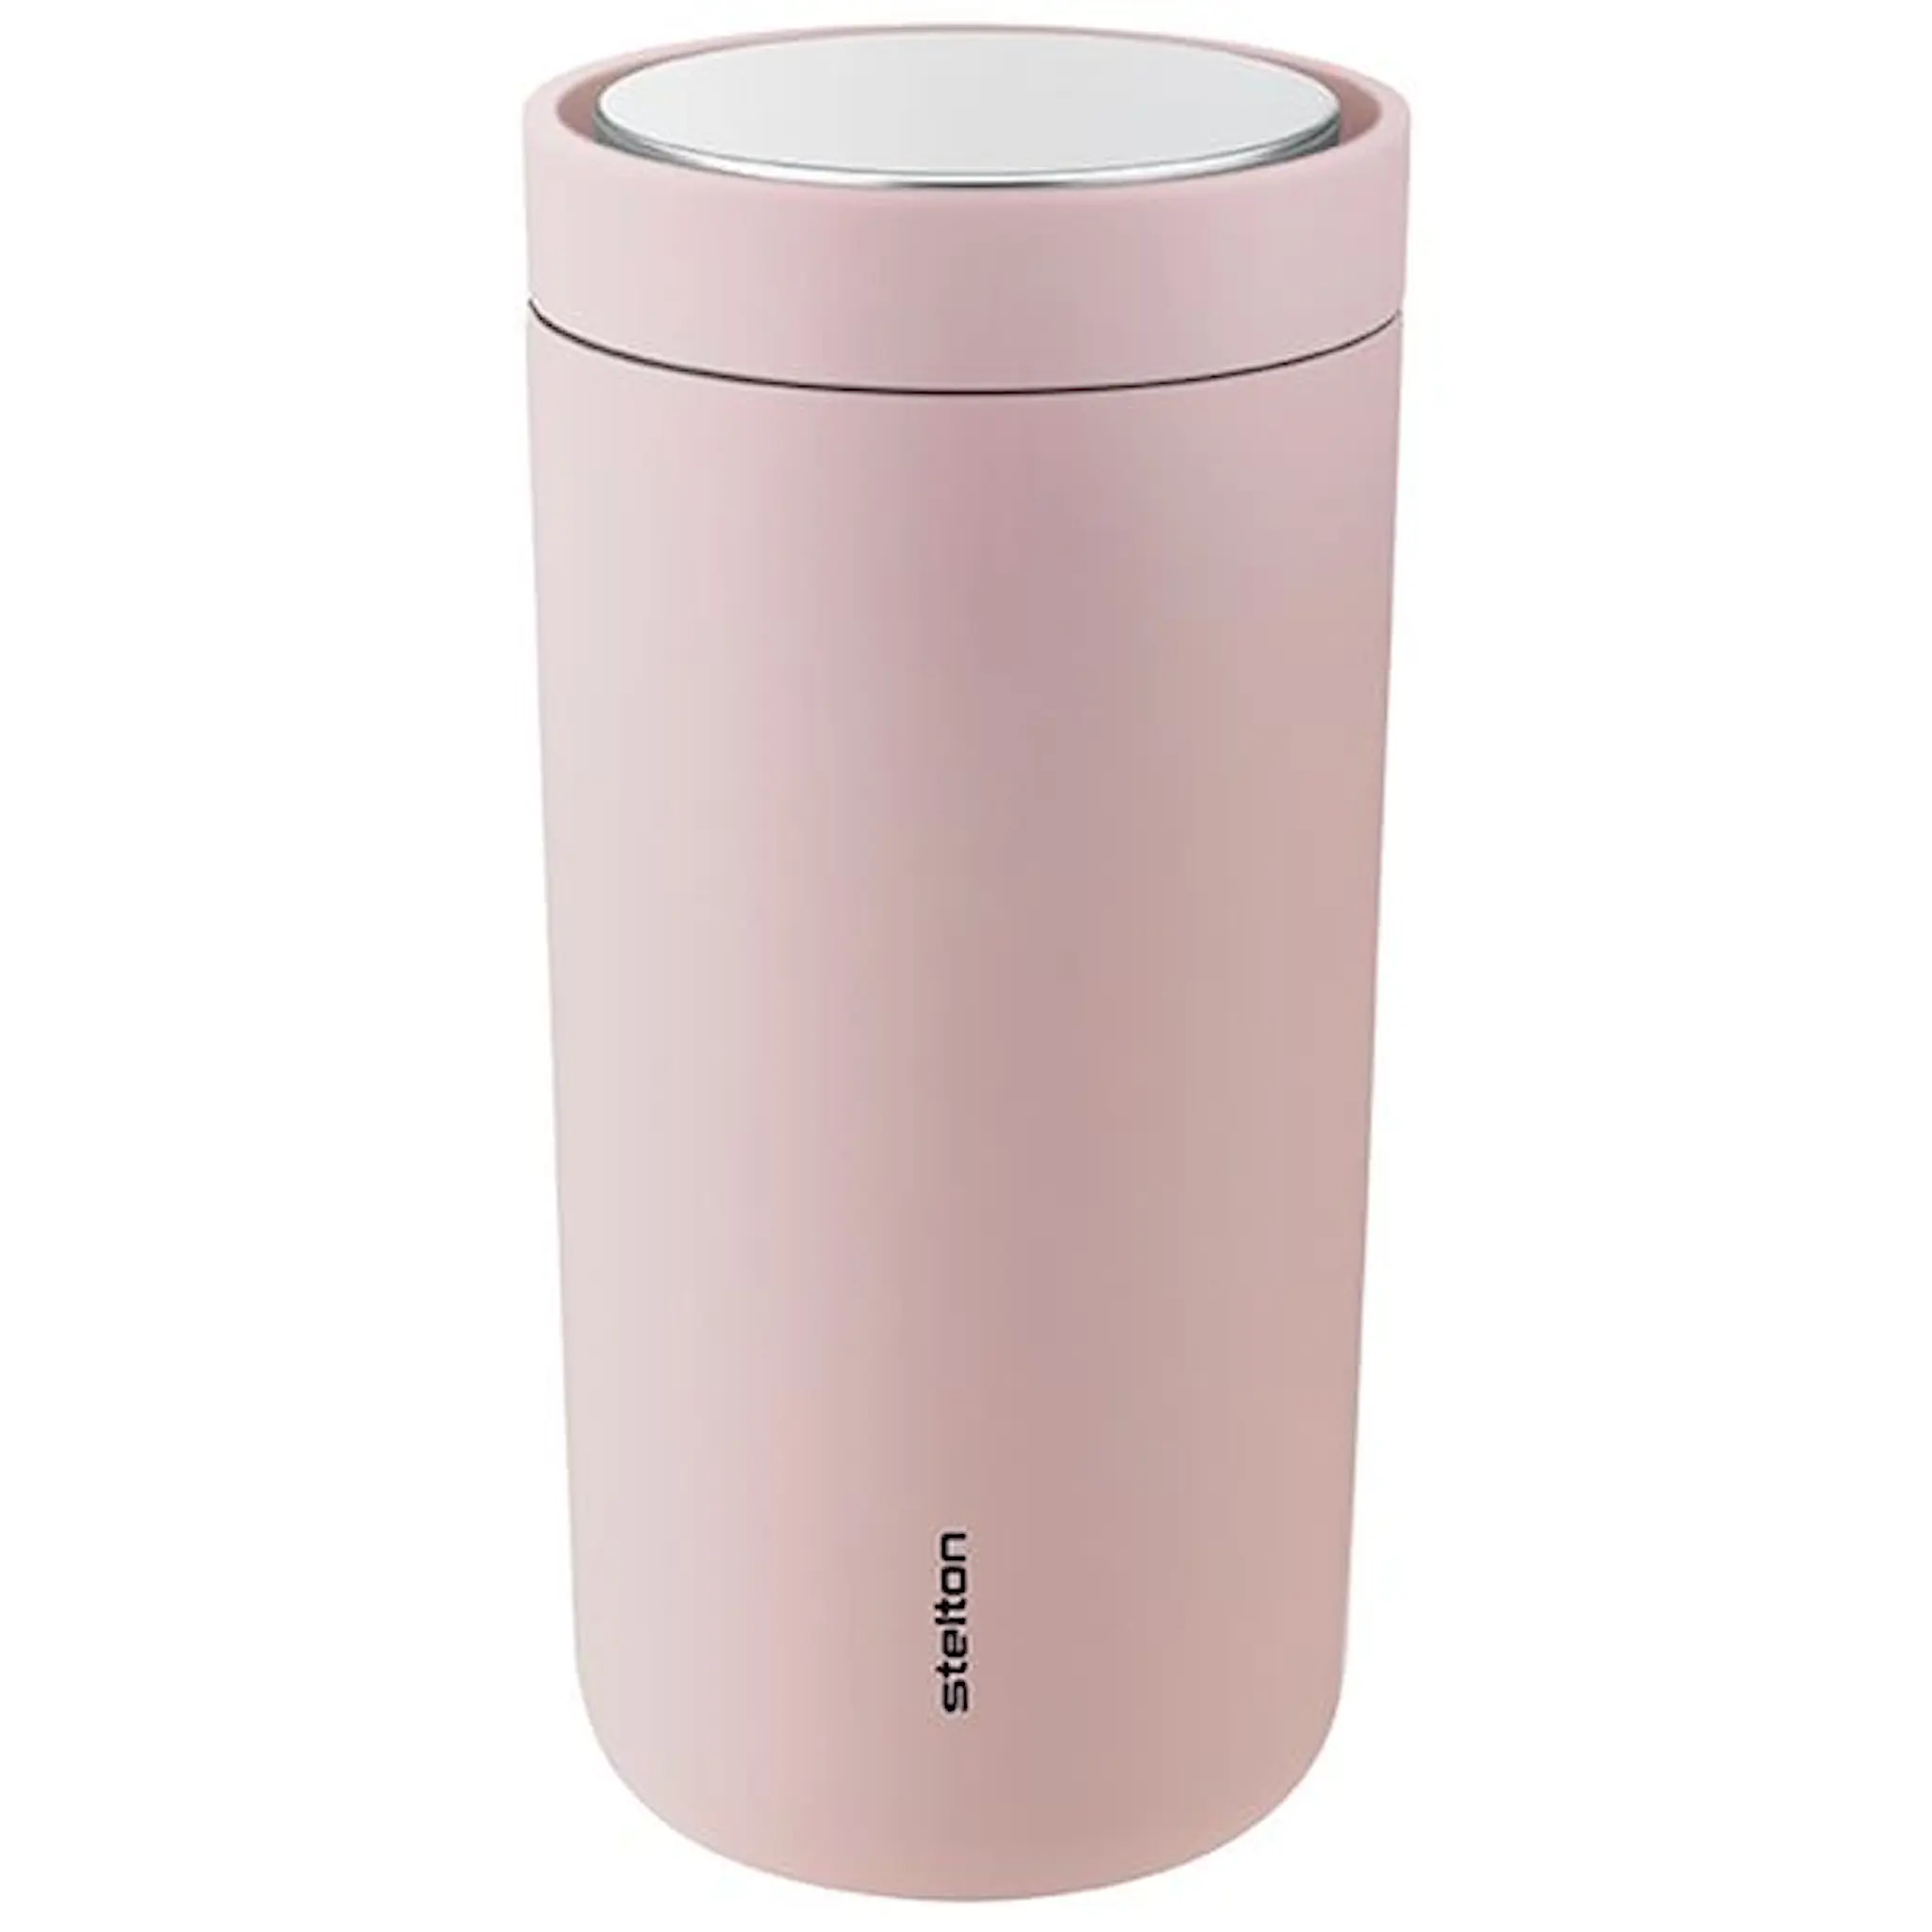 Stelton To Go Click Mugg 40 cl Rosa